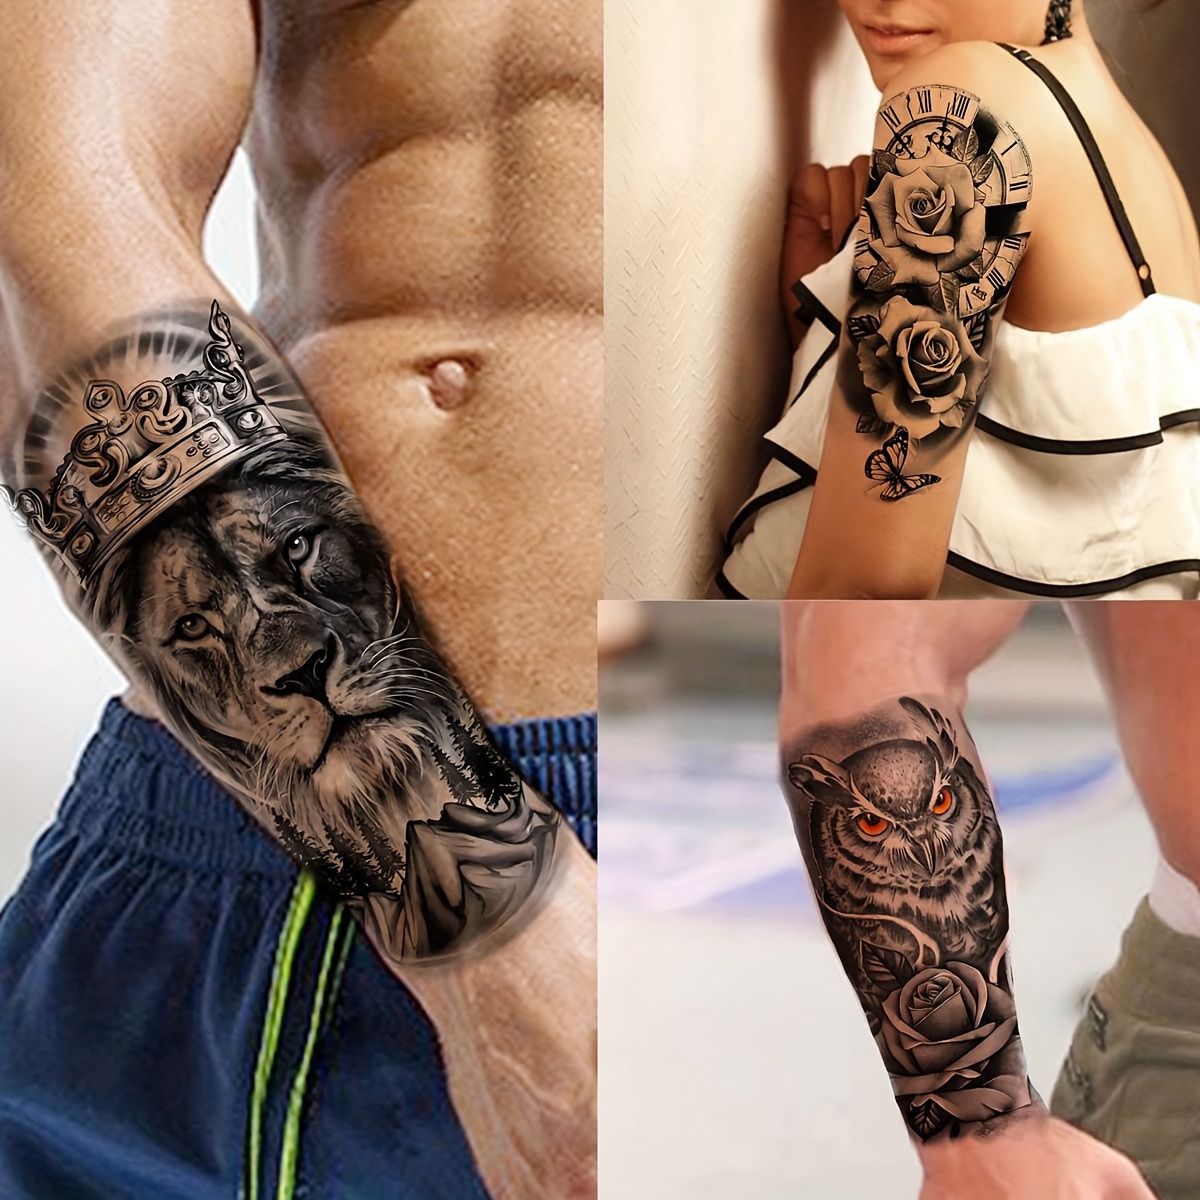 69 Sheets 3D Realistic Tiger Lion Temporary Tattoos For Women Forearm Men  Arm, Half Sleeve Wolf Owl Skull Skeleton Waterproof * Tattoos For Adults